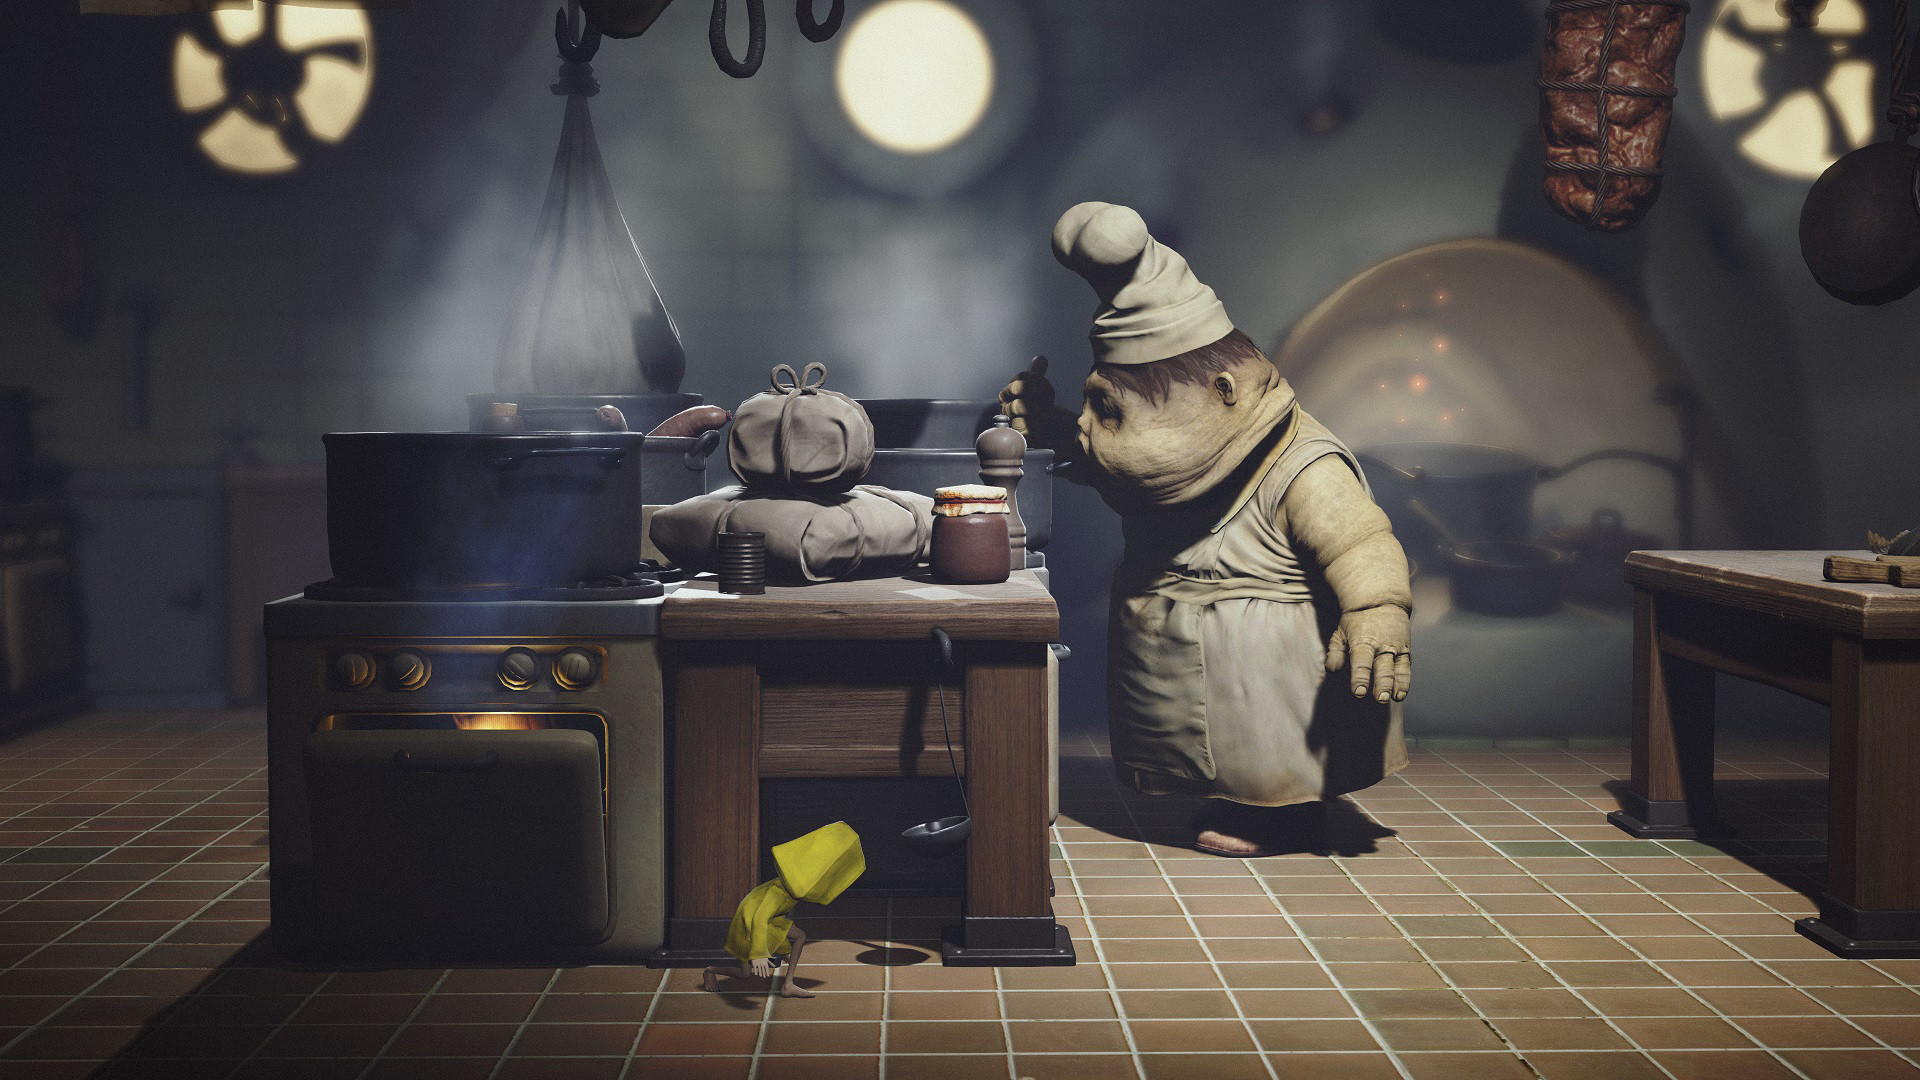 A screenshot from the video game Little Nightmares showing a girl in a yellow raincoat hiding in a kitchen from a monstrous cook.